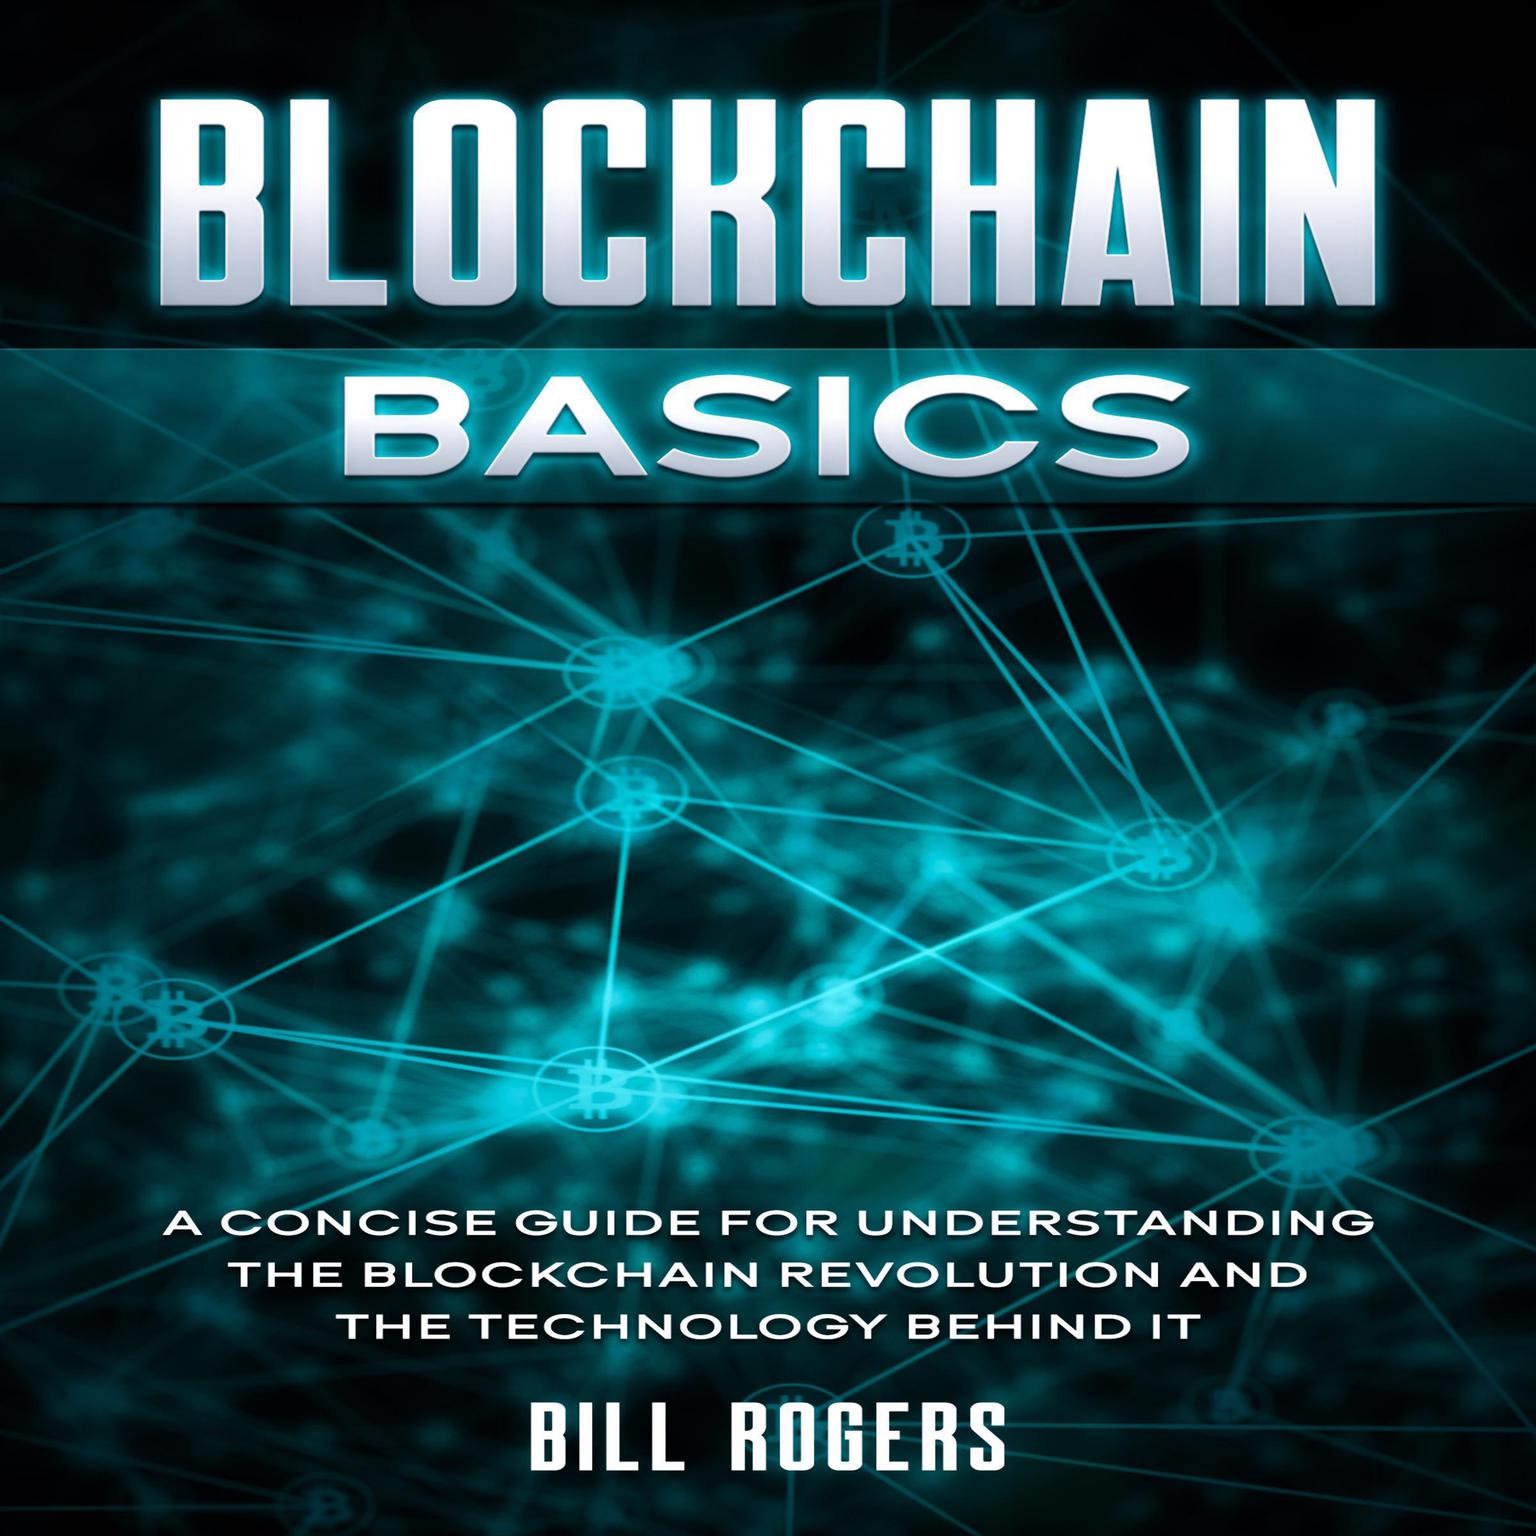 Blockchain Basics: A Concise Guide for Understanding the Blockchain Revolution and the Technology Behind It Audiobook, by Bill Rogers